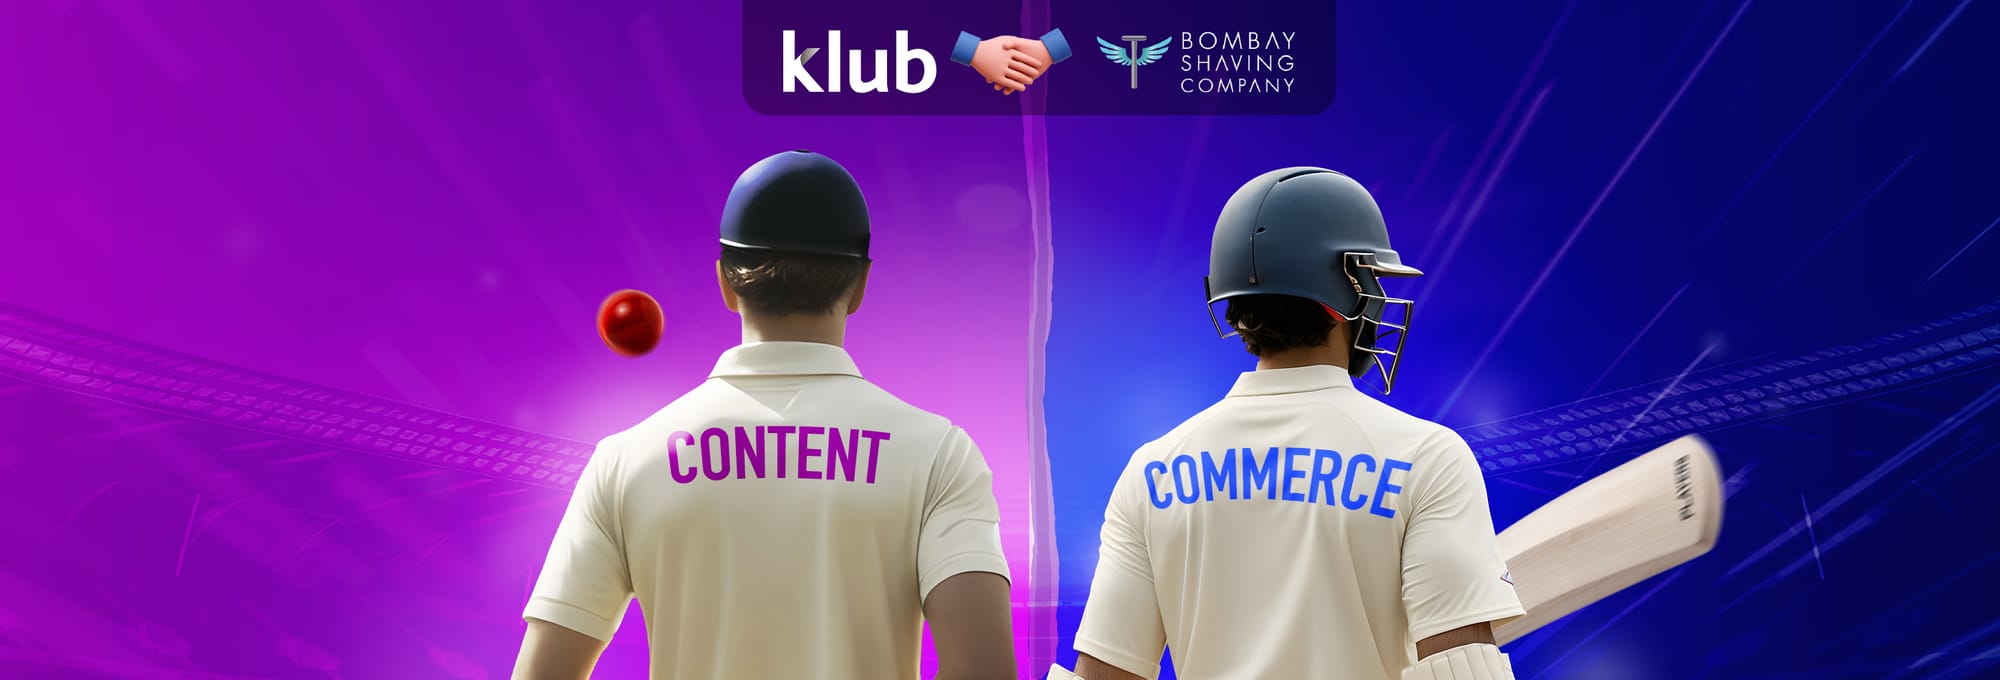 From cricket to content to commerce: Unlock winning strategies from Bombay Shaving Company